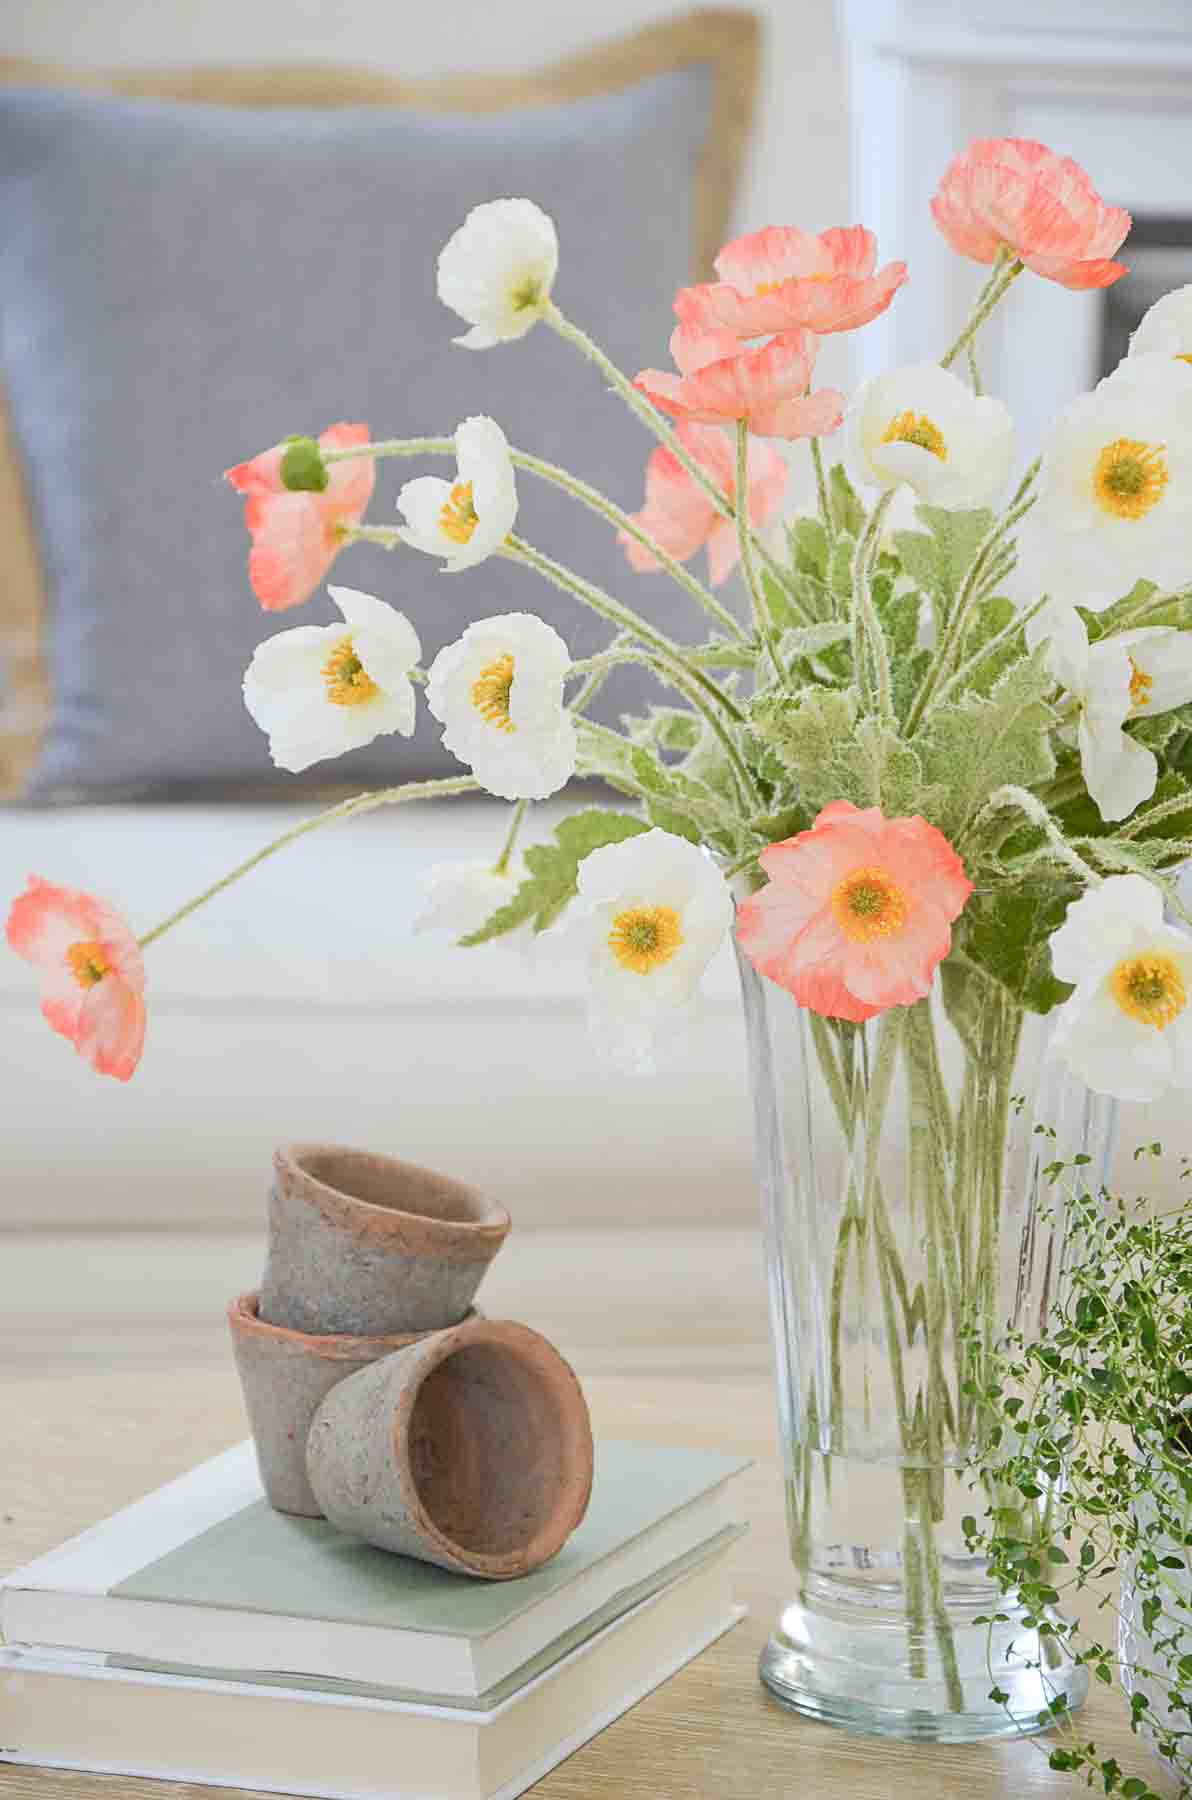 https://www.stonegableblog.com/wp-content/uploads/2023/01/FAUX-FLOWERS-salmon-and-white-poppies-in-a-glass-vase-13.jpg